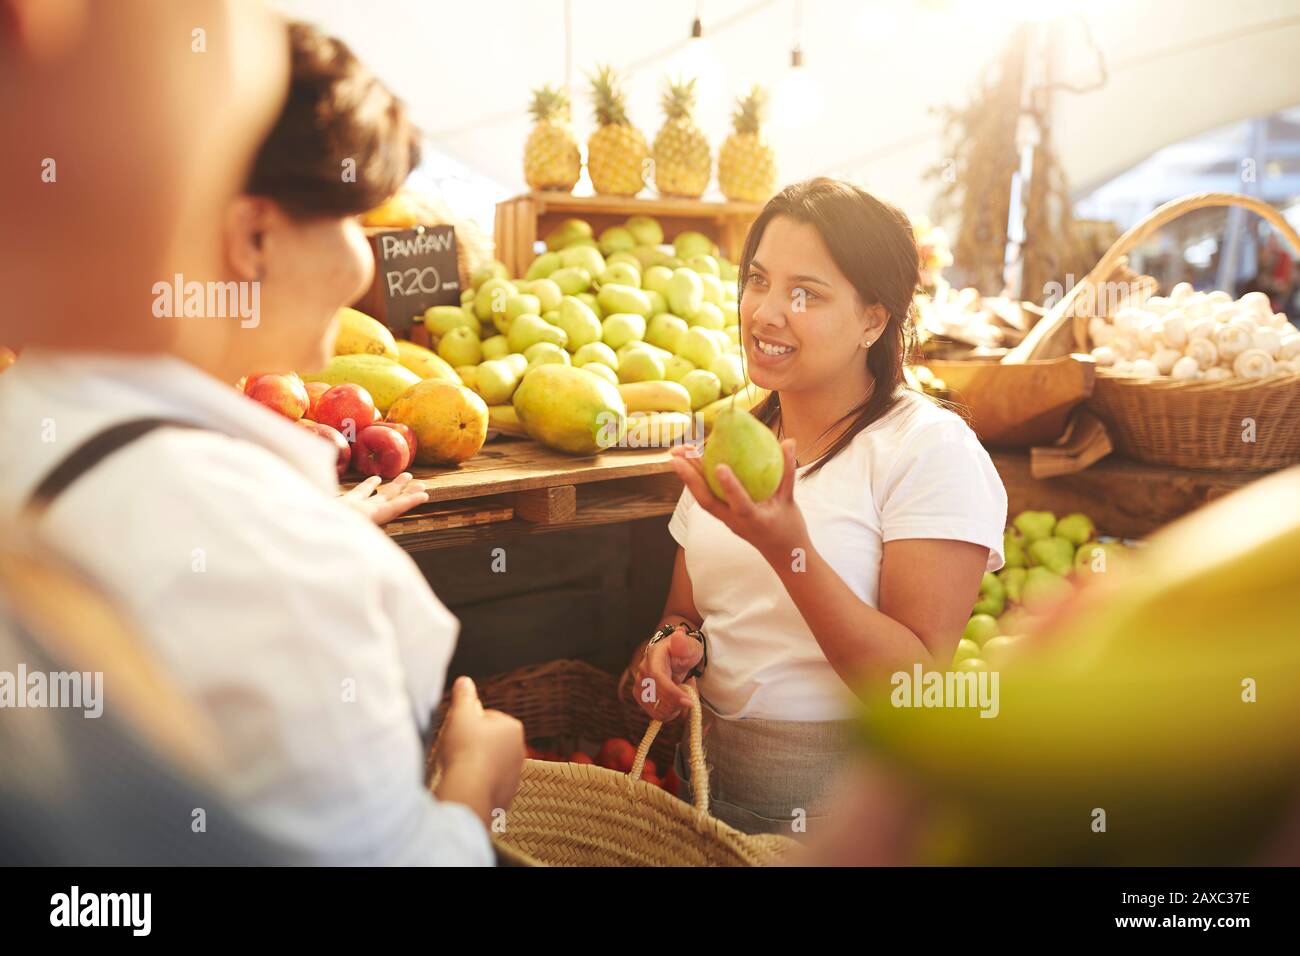 Woman working, arranging pears at farmer’s market Stock Photo